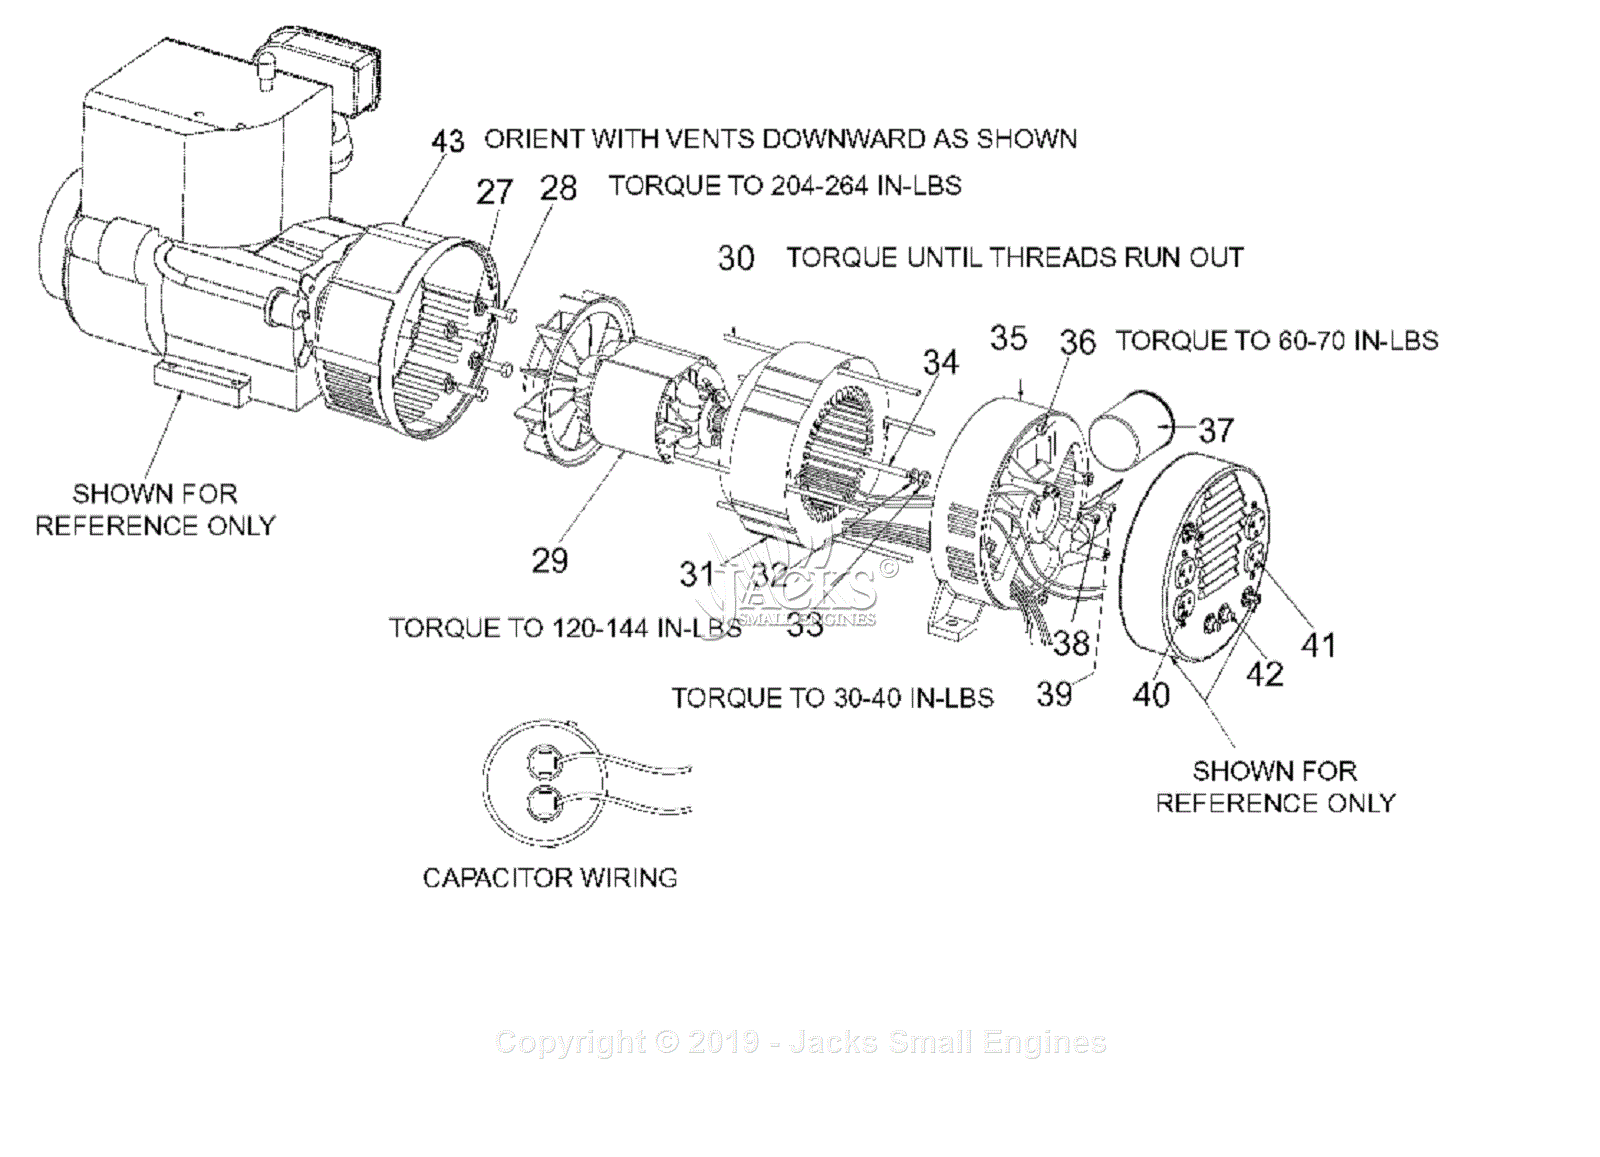 Devilbiss GB5000 Type 4 Parts Diagrams  Jacks Small Engines